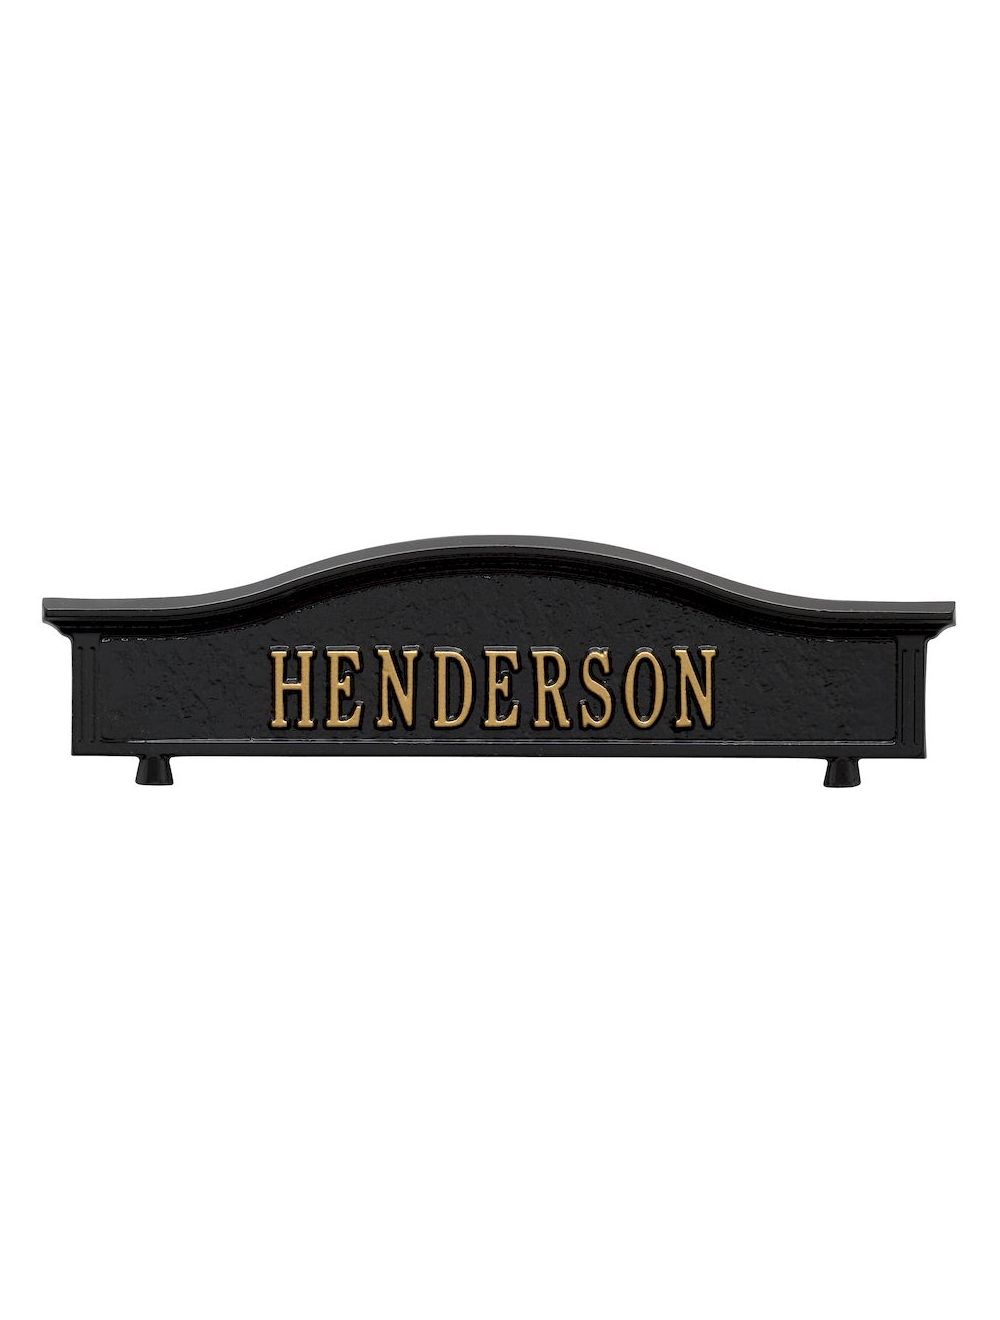 Customized Name or Address Metal Mailbox Topper 